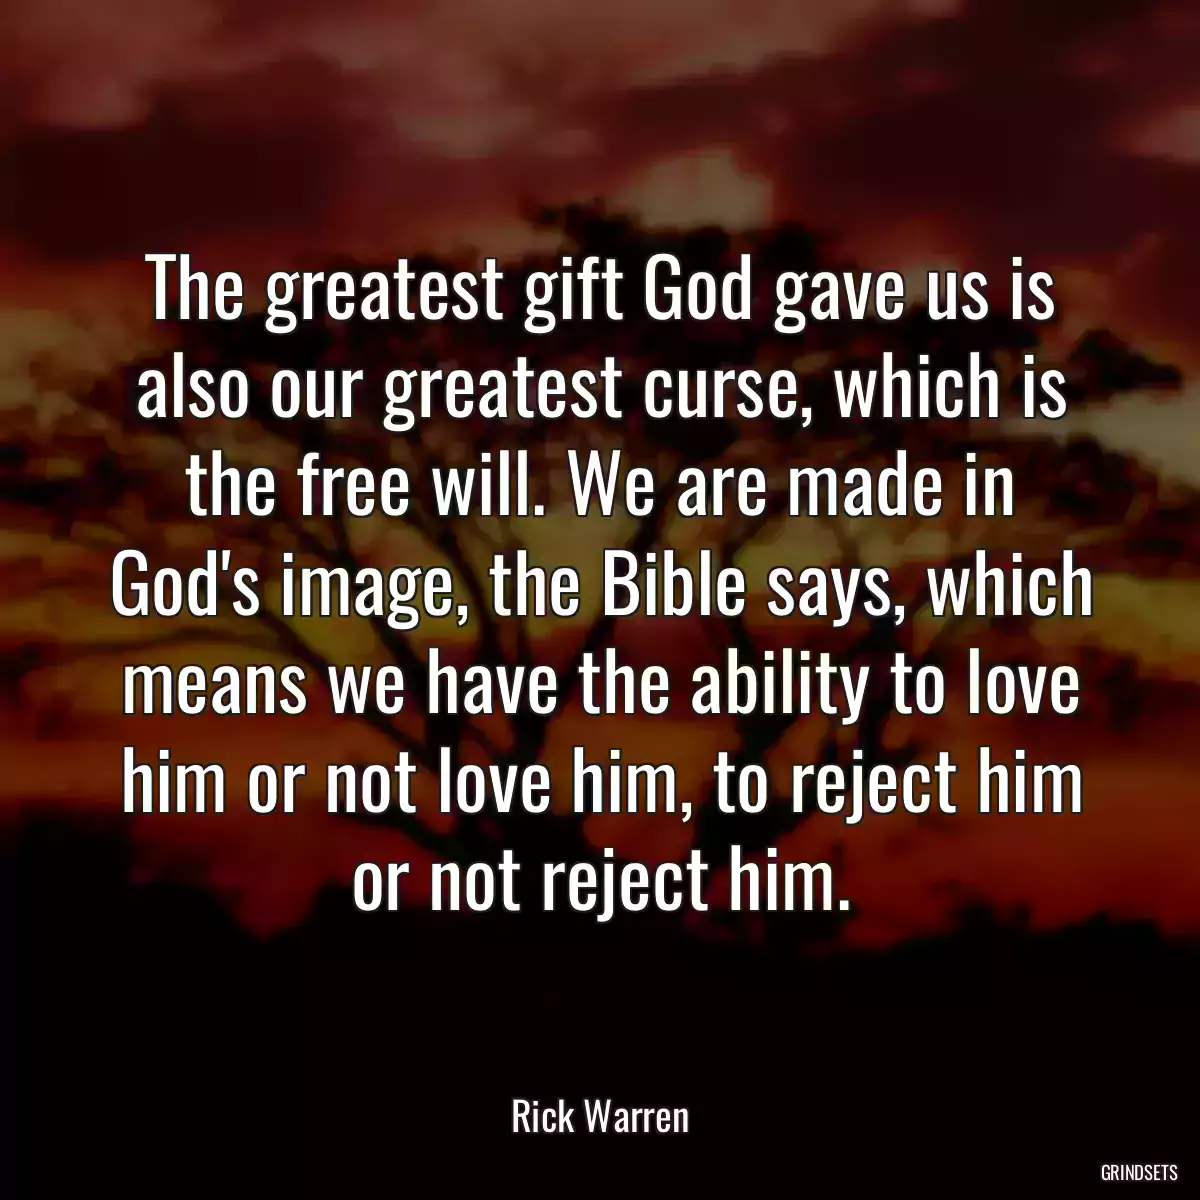 The greatest gift God gave us is also our greatest curse, which is the free will. We are made in God\'s image, the Bible says, which means we have the ability to love him or not love him, to reject him or not reject him.